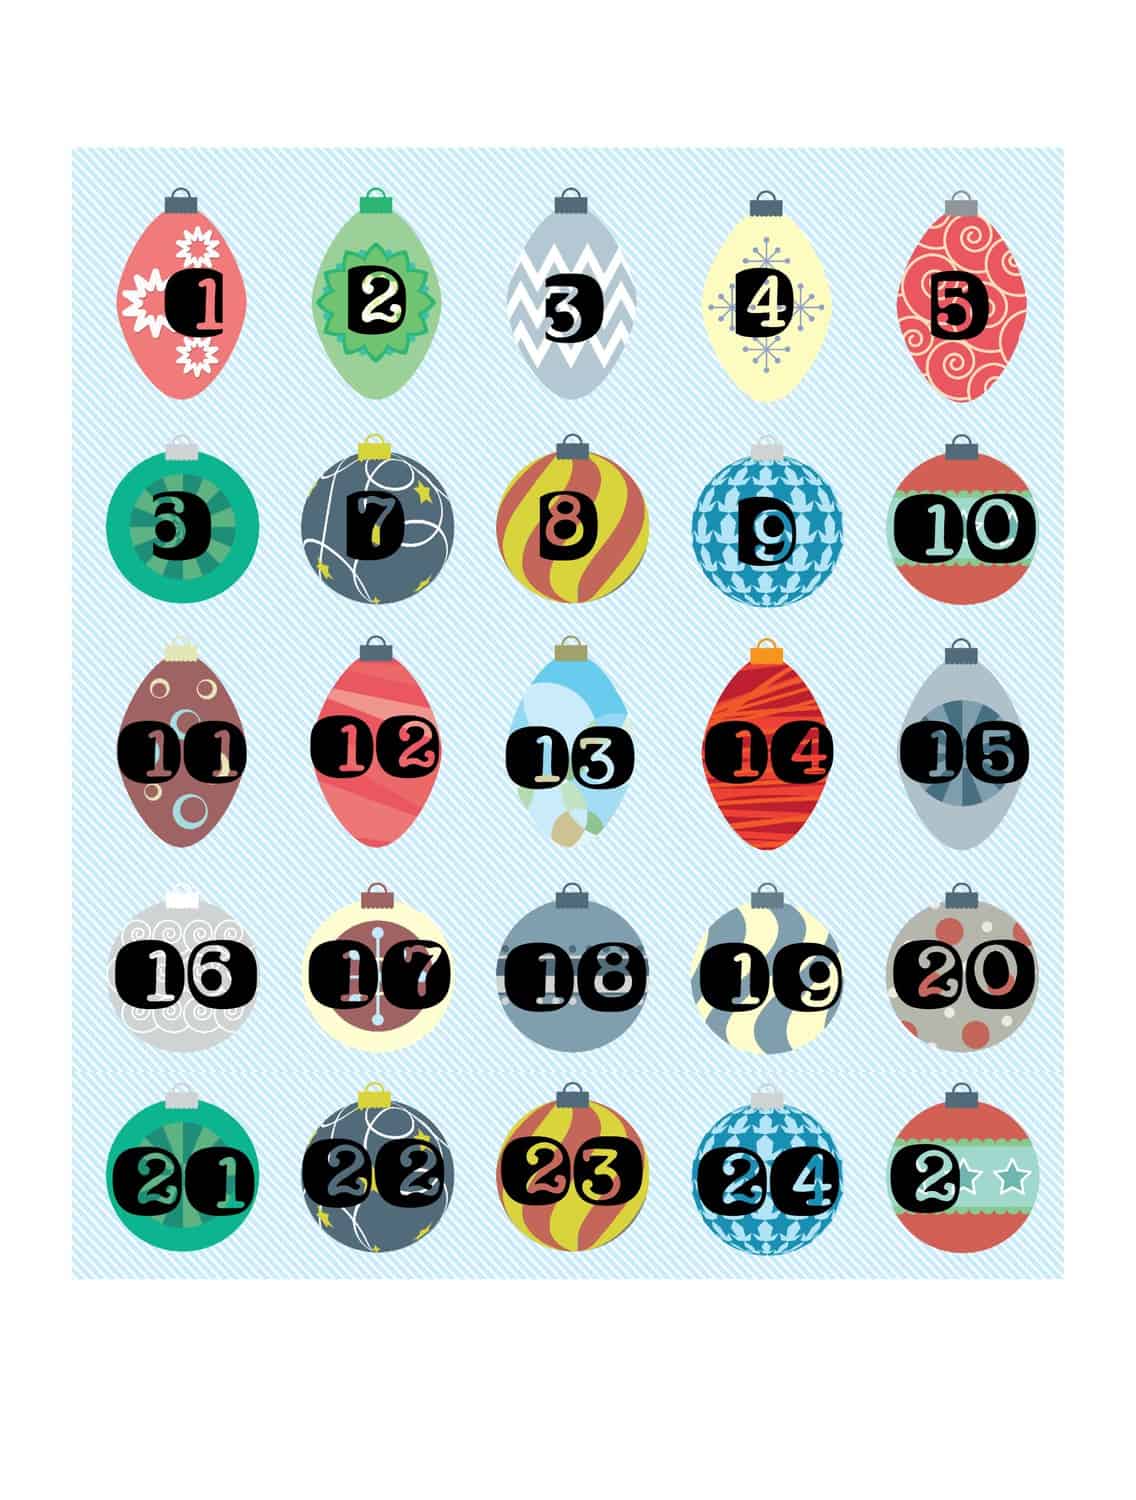 easy-christmas-cracker-advent-calendar-with-free-printable-numbers